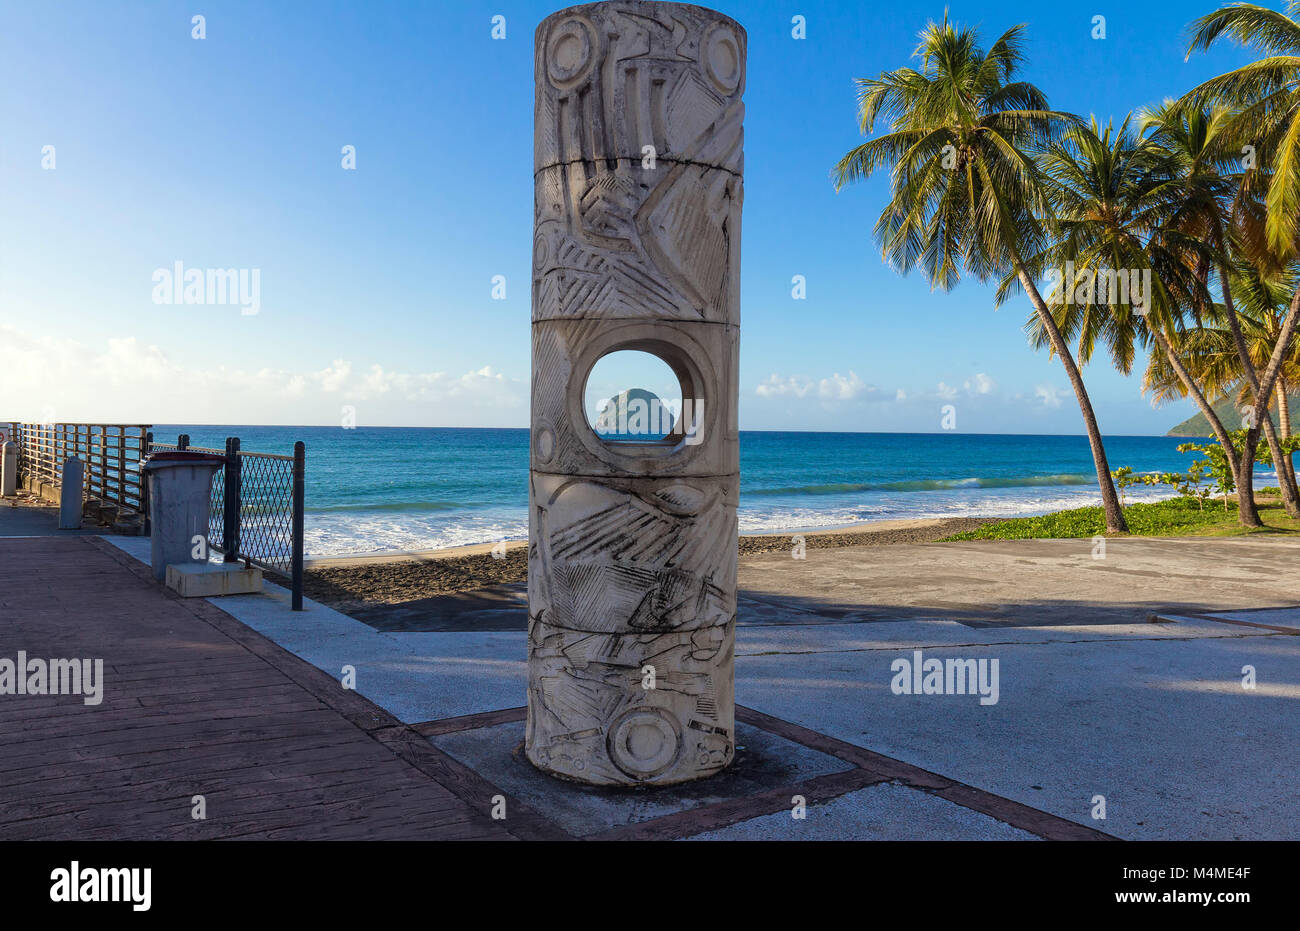 The Diamond rock in Martinique island, French West Indies. Stock Photo